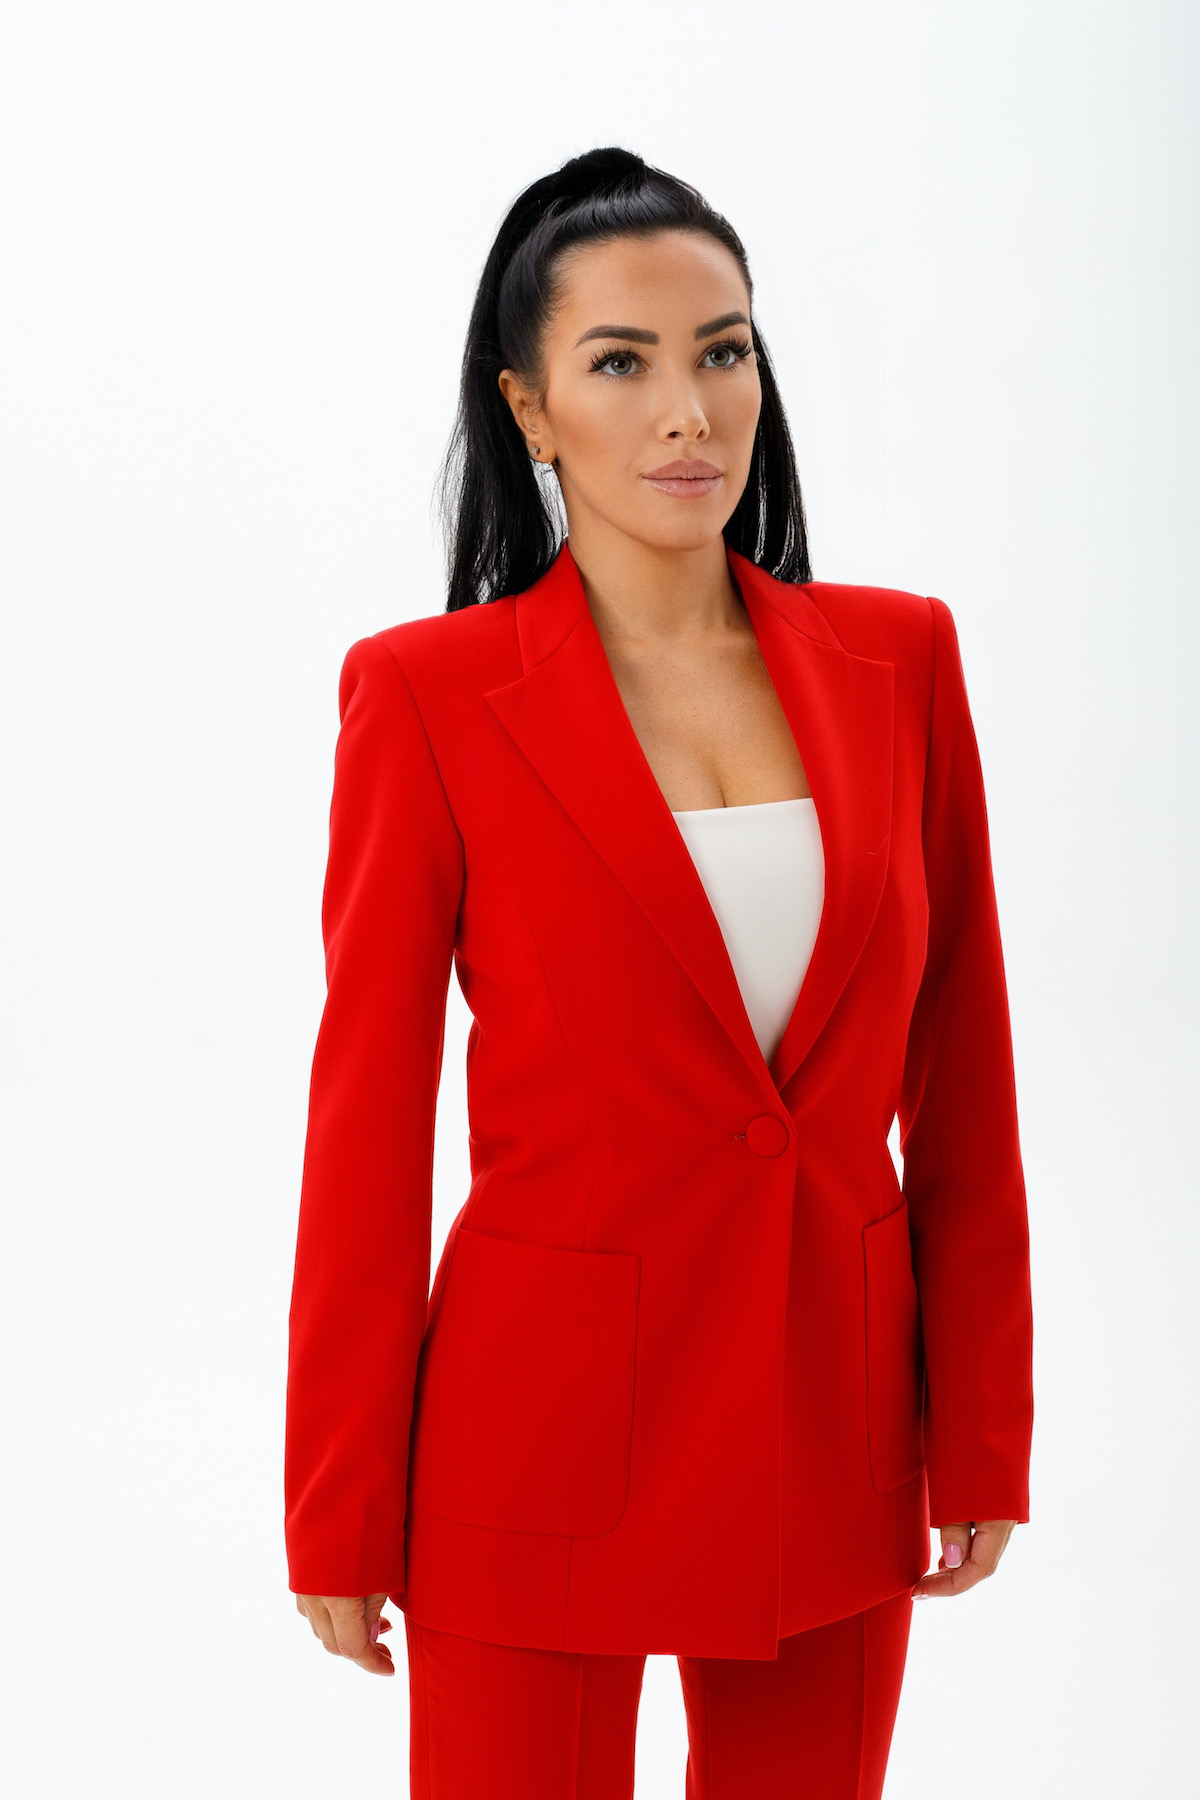 Vintage Red And Black Blazer Red Suit Dress For Women Autumn Fashion 2023  Perfect For Office And Business Wear 5010 From Kaoya, $61.45